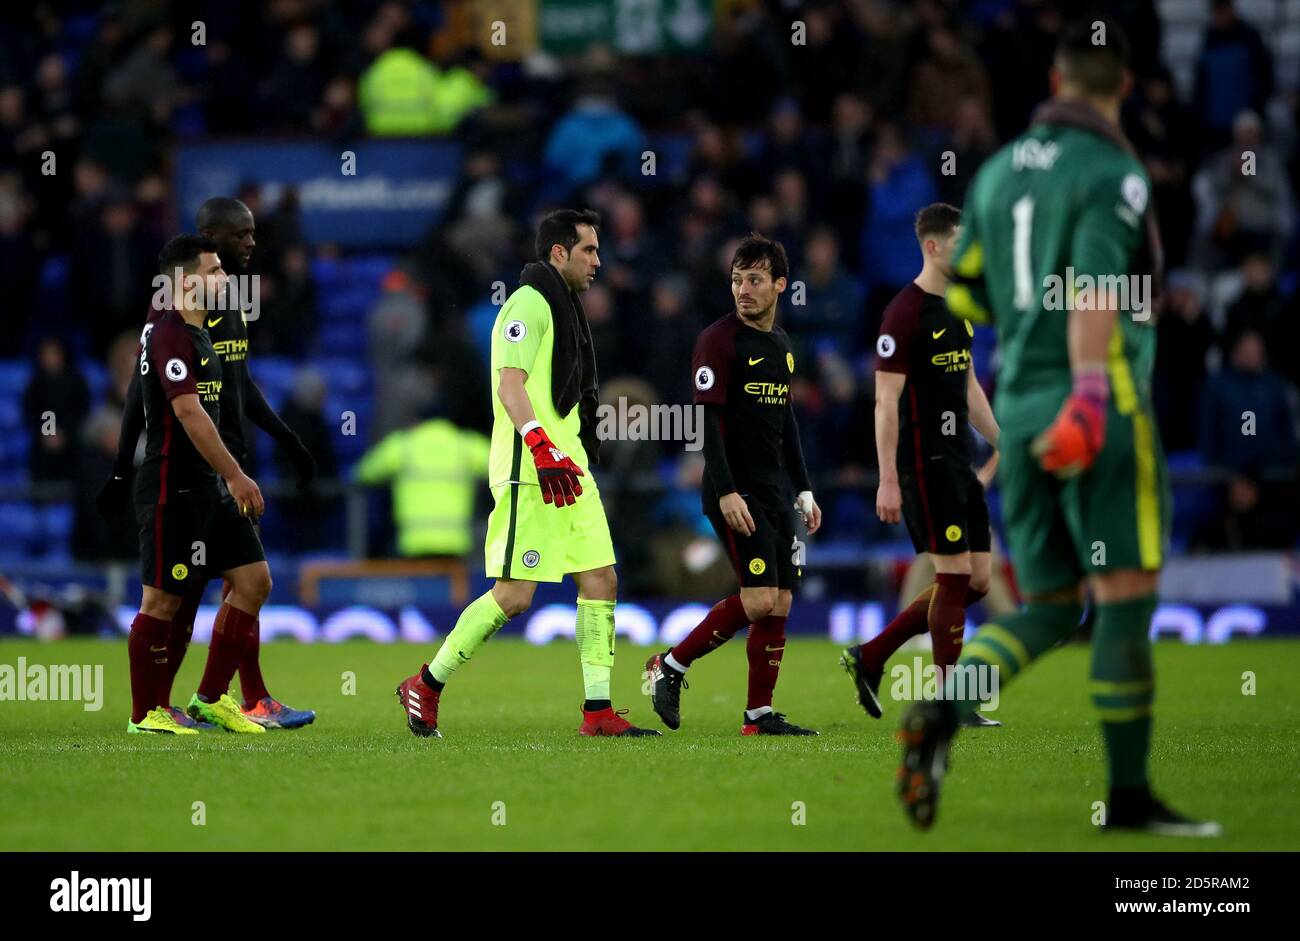 Manchester City's Sergio Aguero (left), Manchester City goalkeeper Claudio Bravo (centre) and Manchester City's David Silva (right) appear dejected after the final whistle Stock Photo